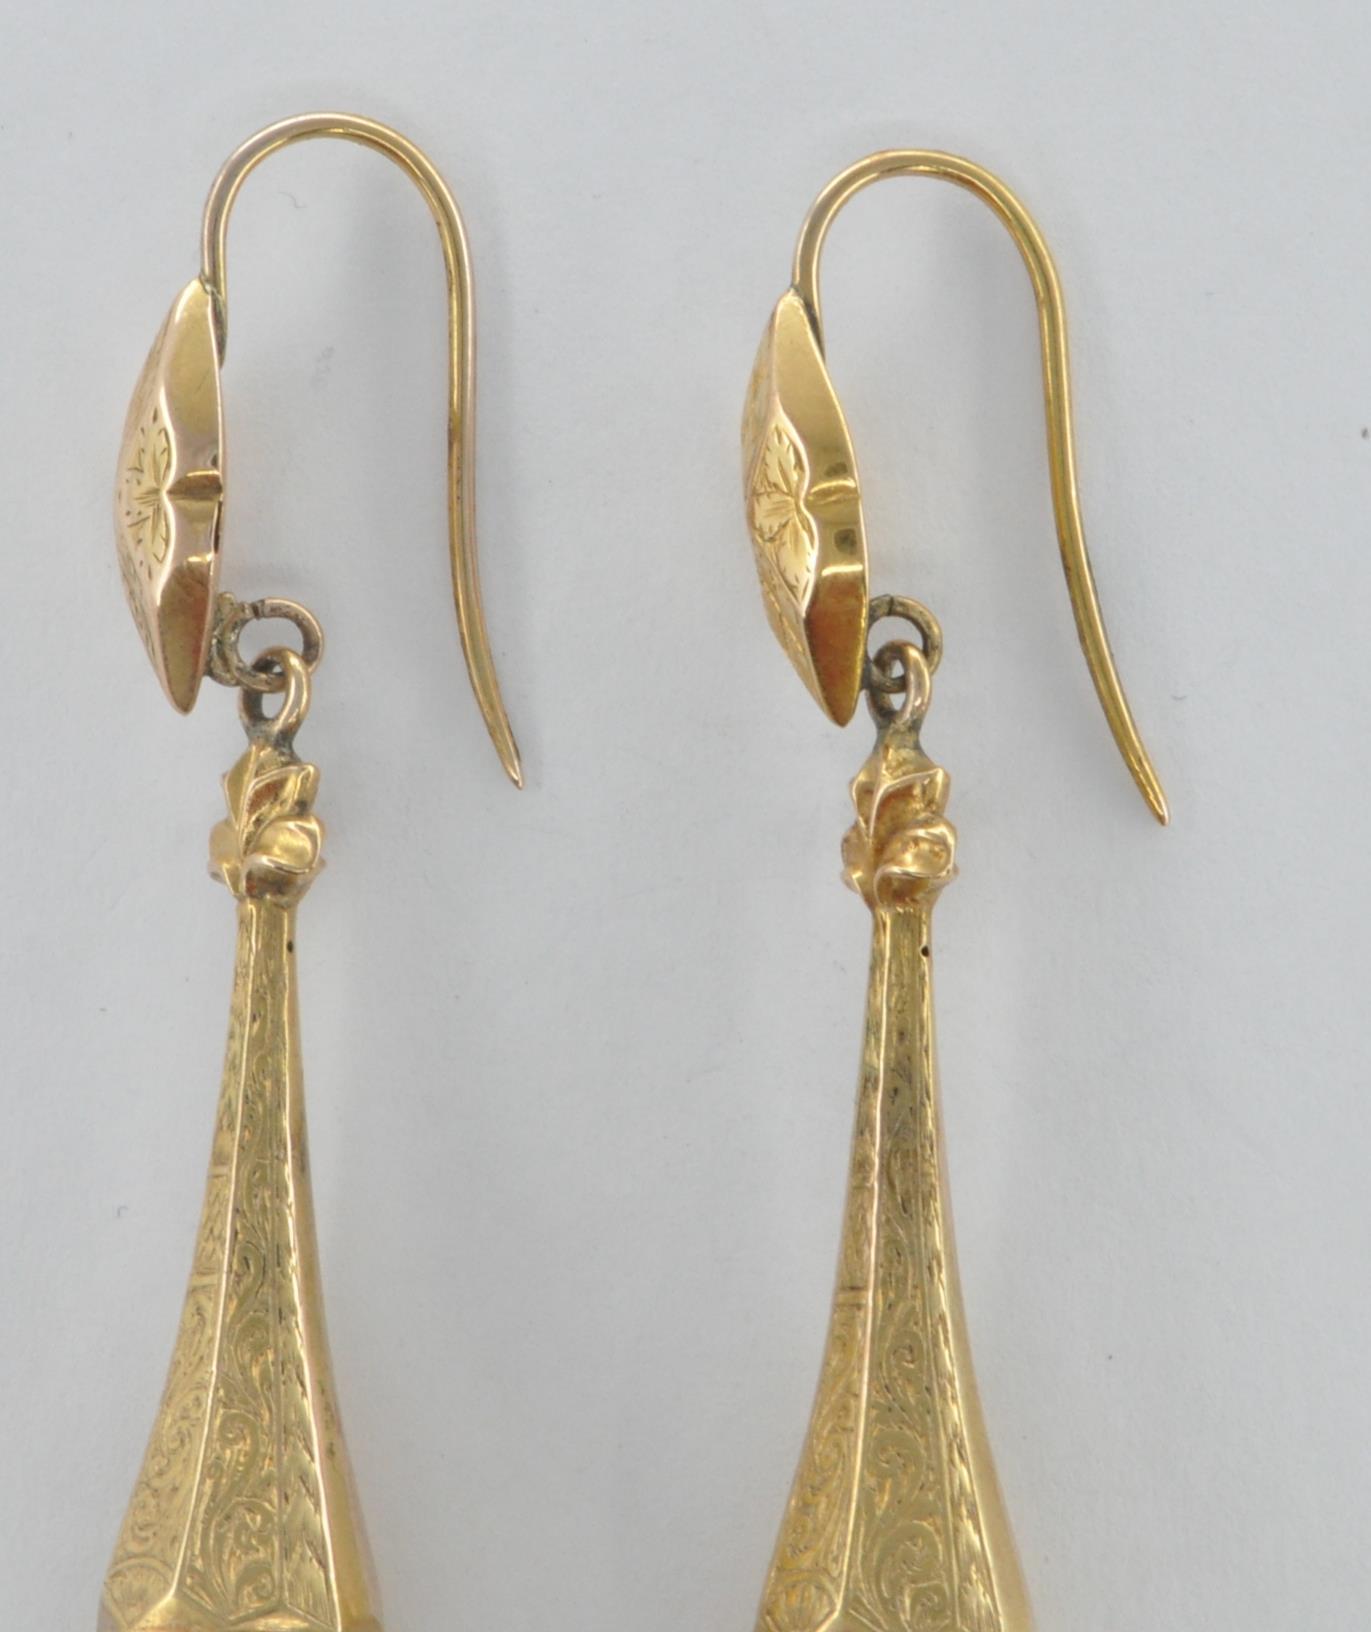 PAIR OF VICTORIAN GOLD DROP EARRINGS - Image 2 of 6